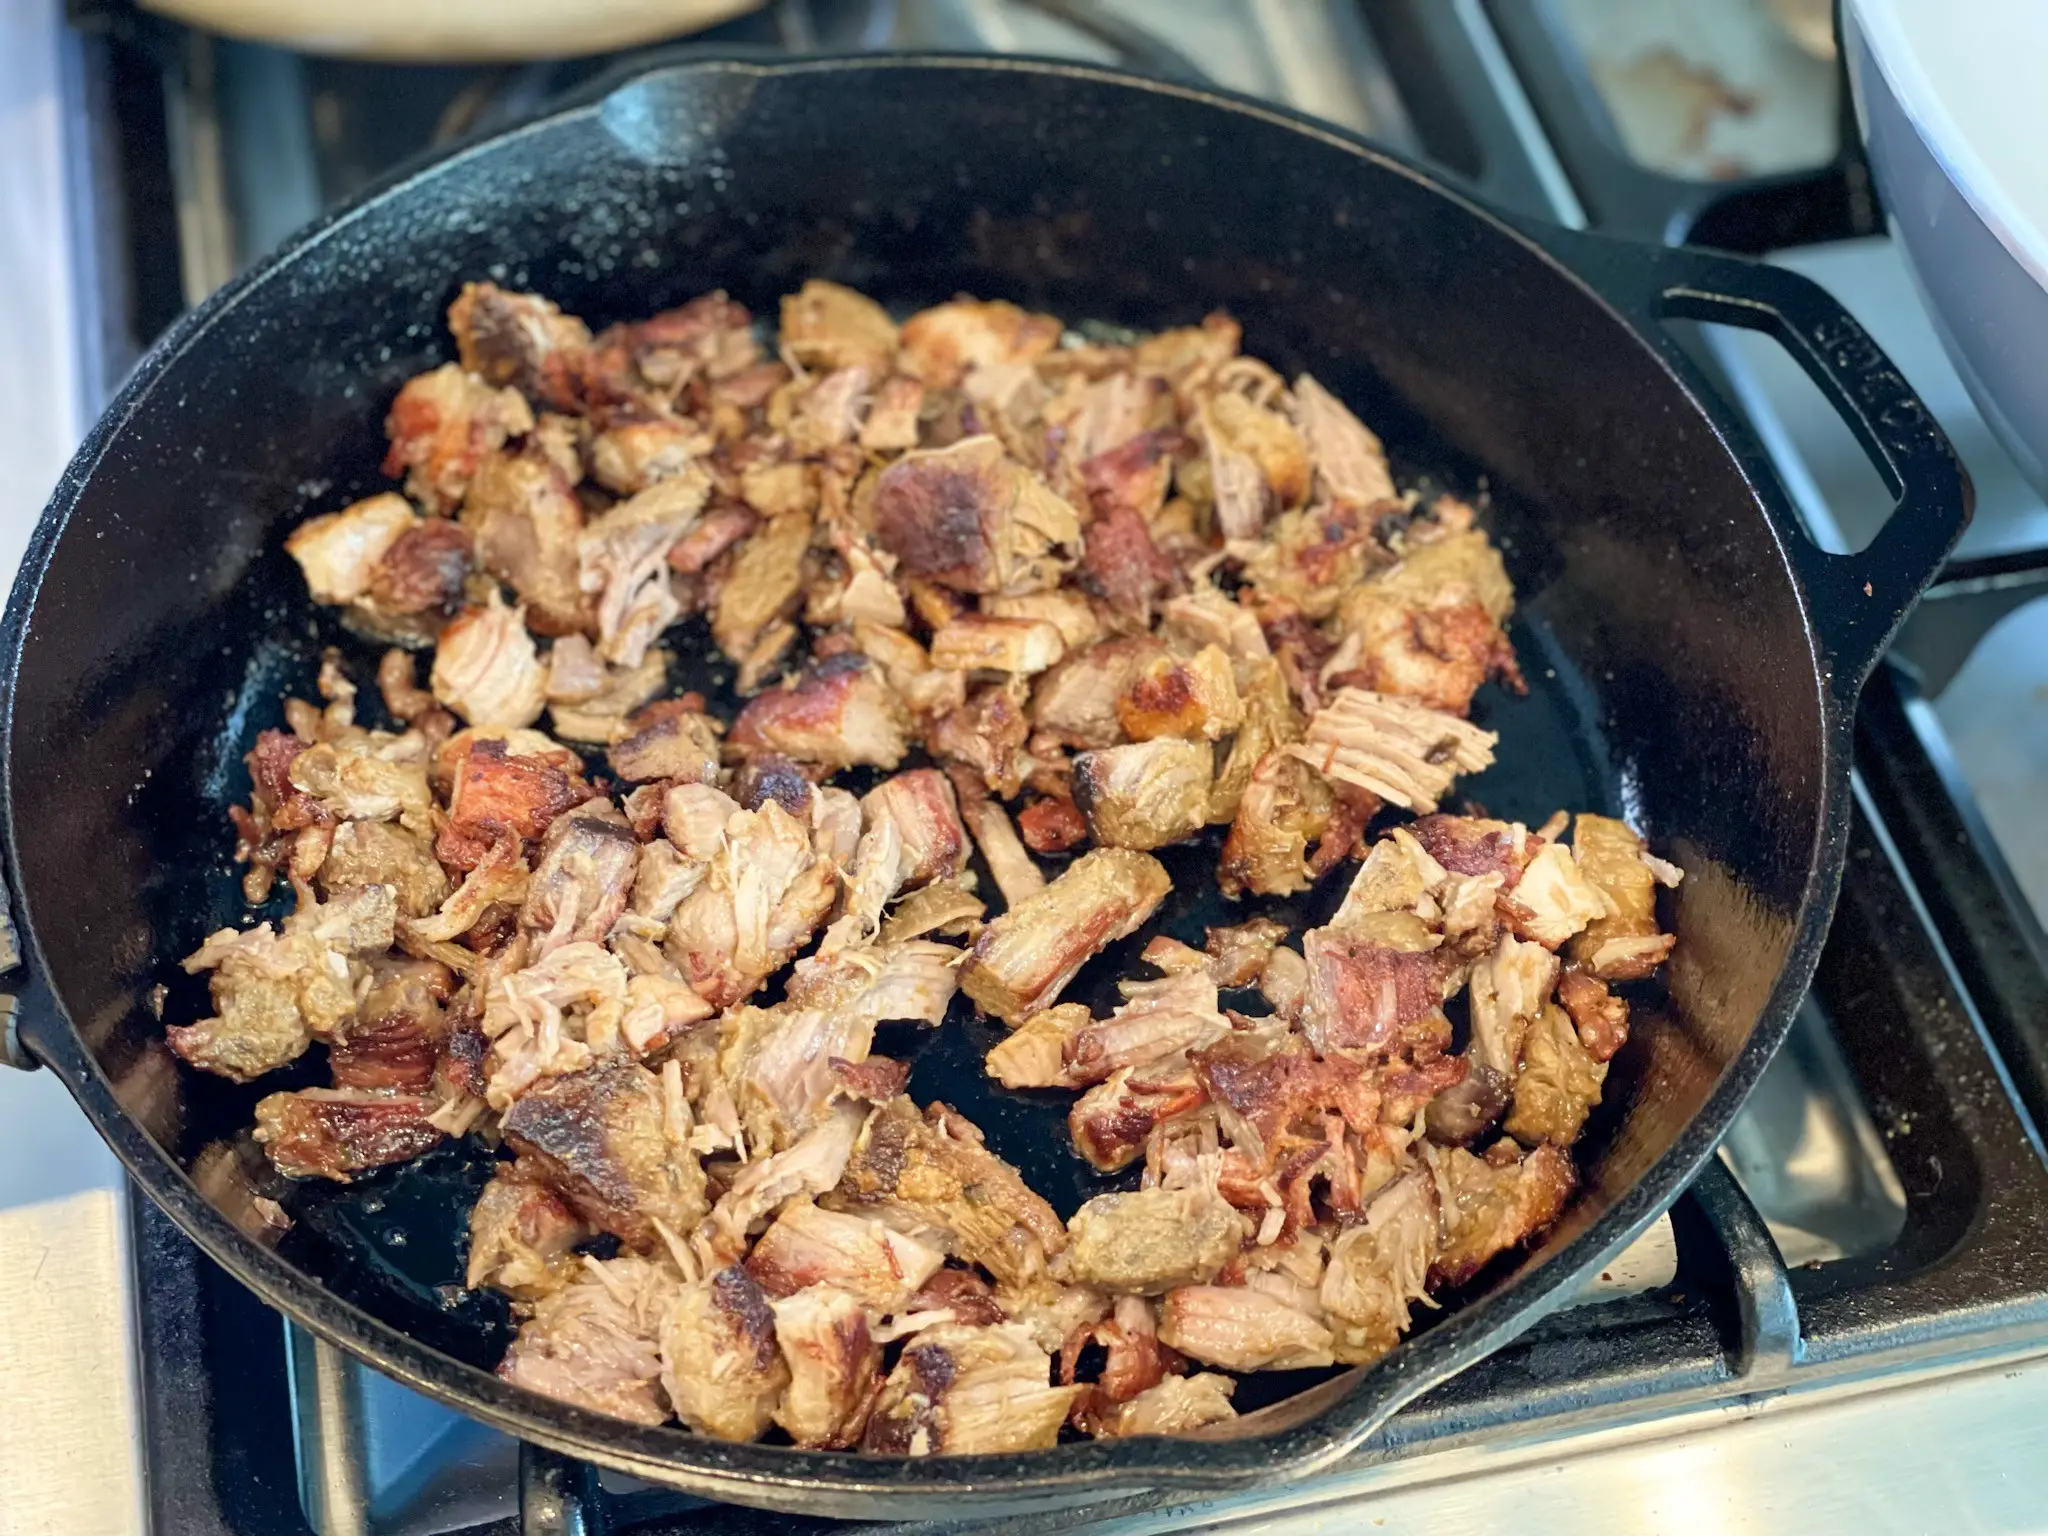 browning masitas in a cast iron skillet